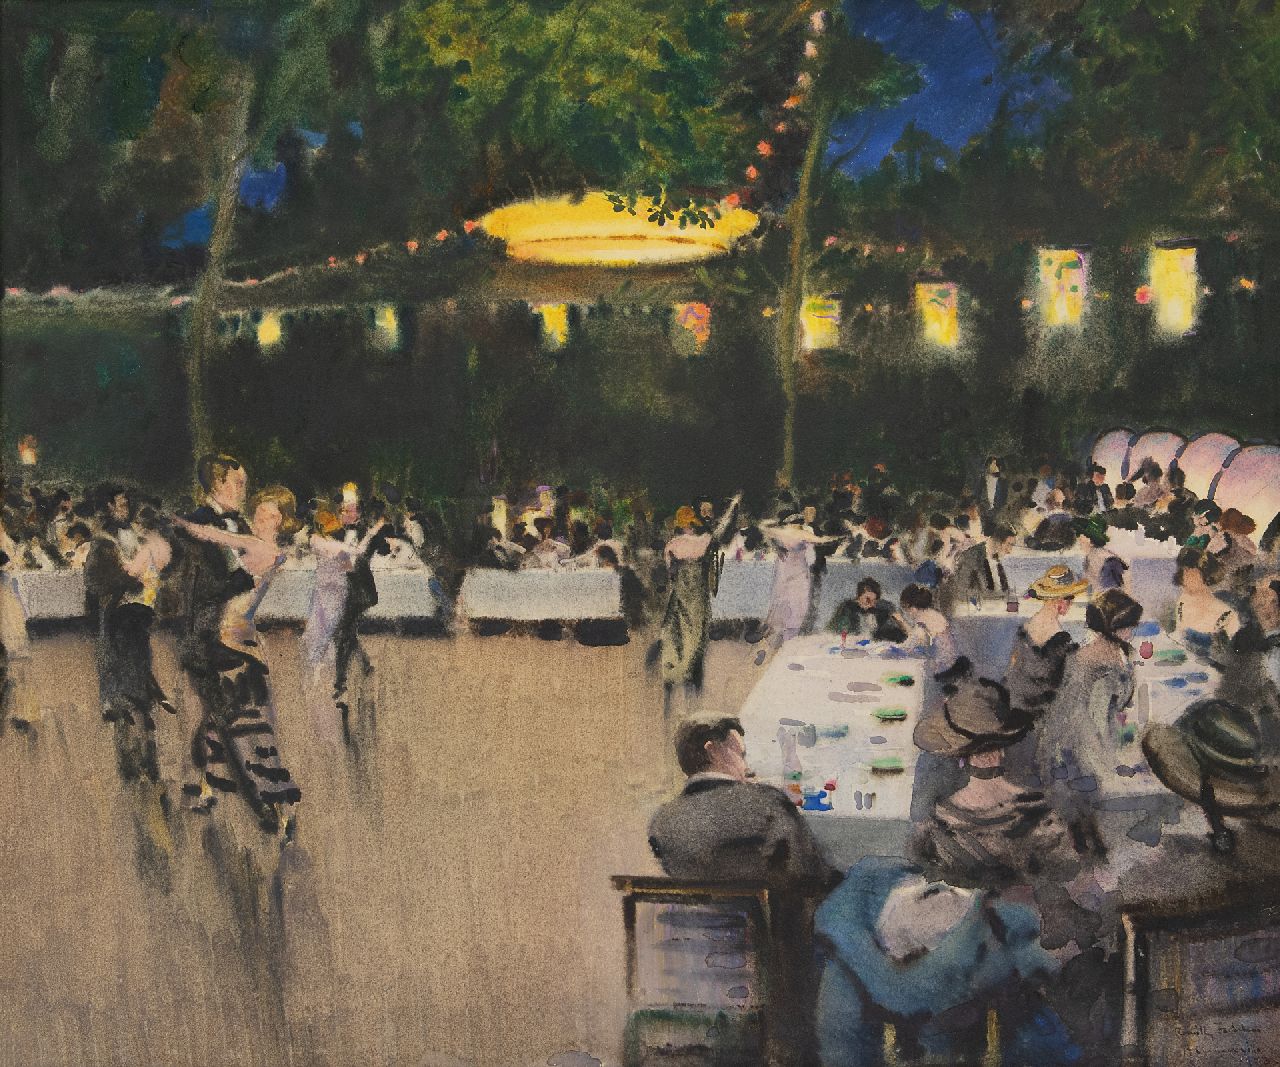 A. Romilly Fedden | Party night, watercolour on paper, 52.5 x 64.0 cm, signed l.r. and dated 1923